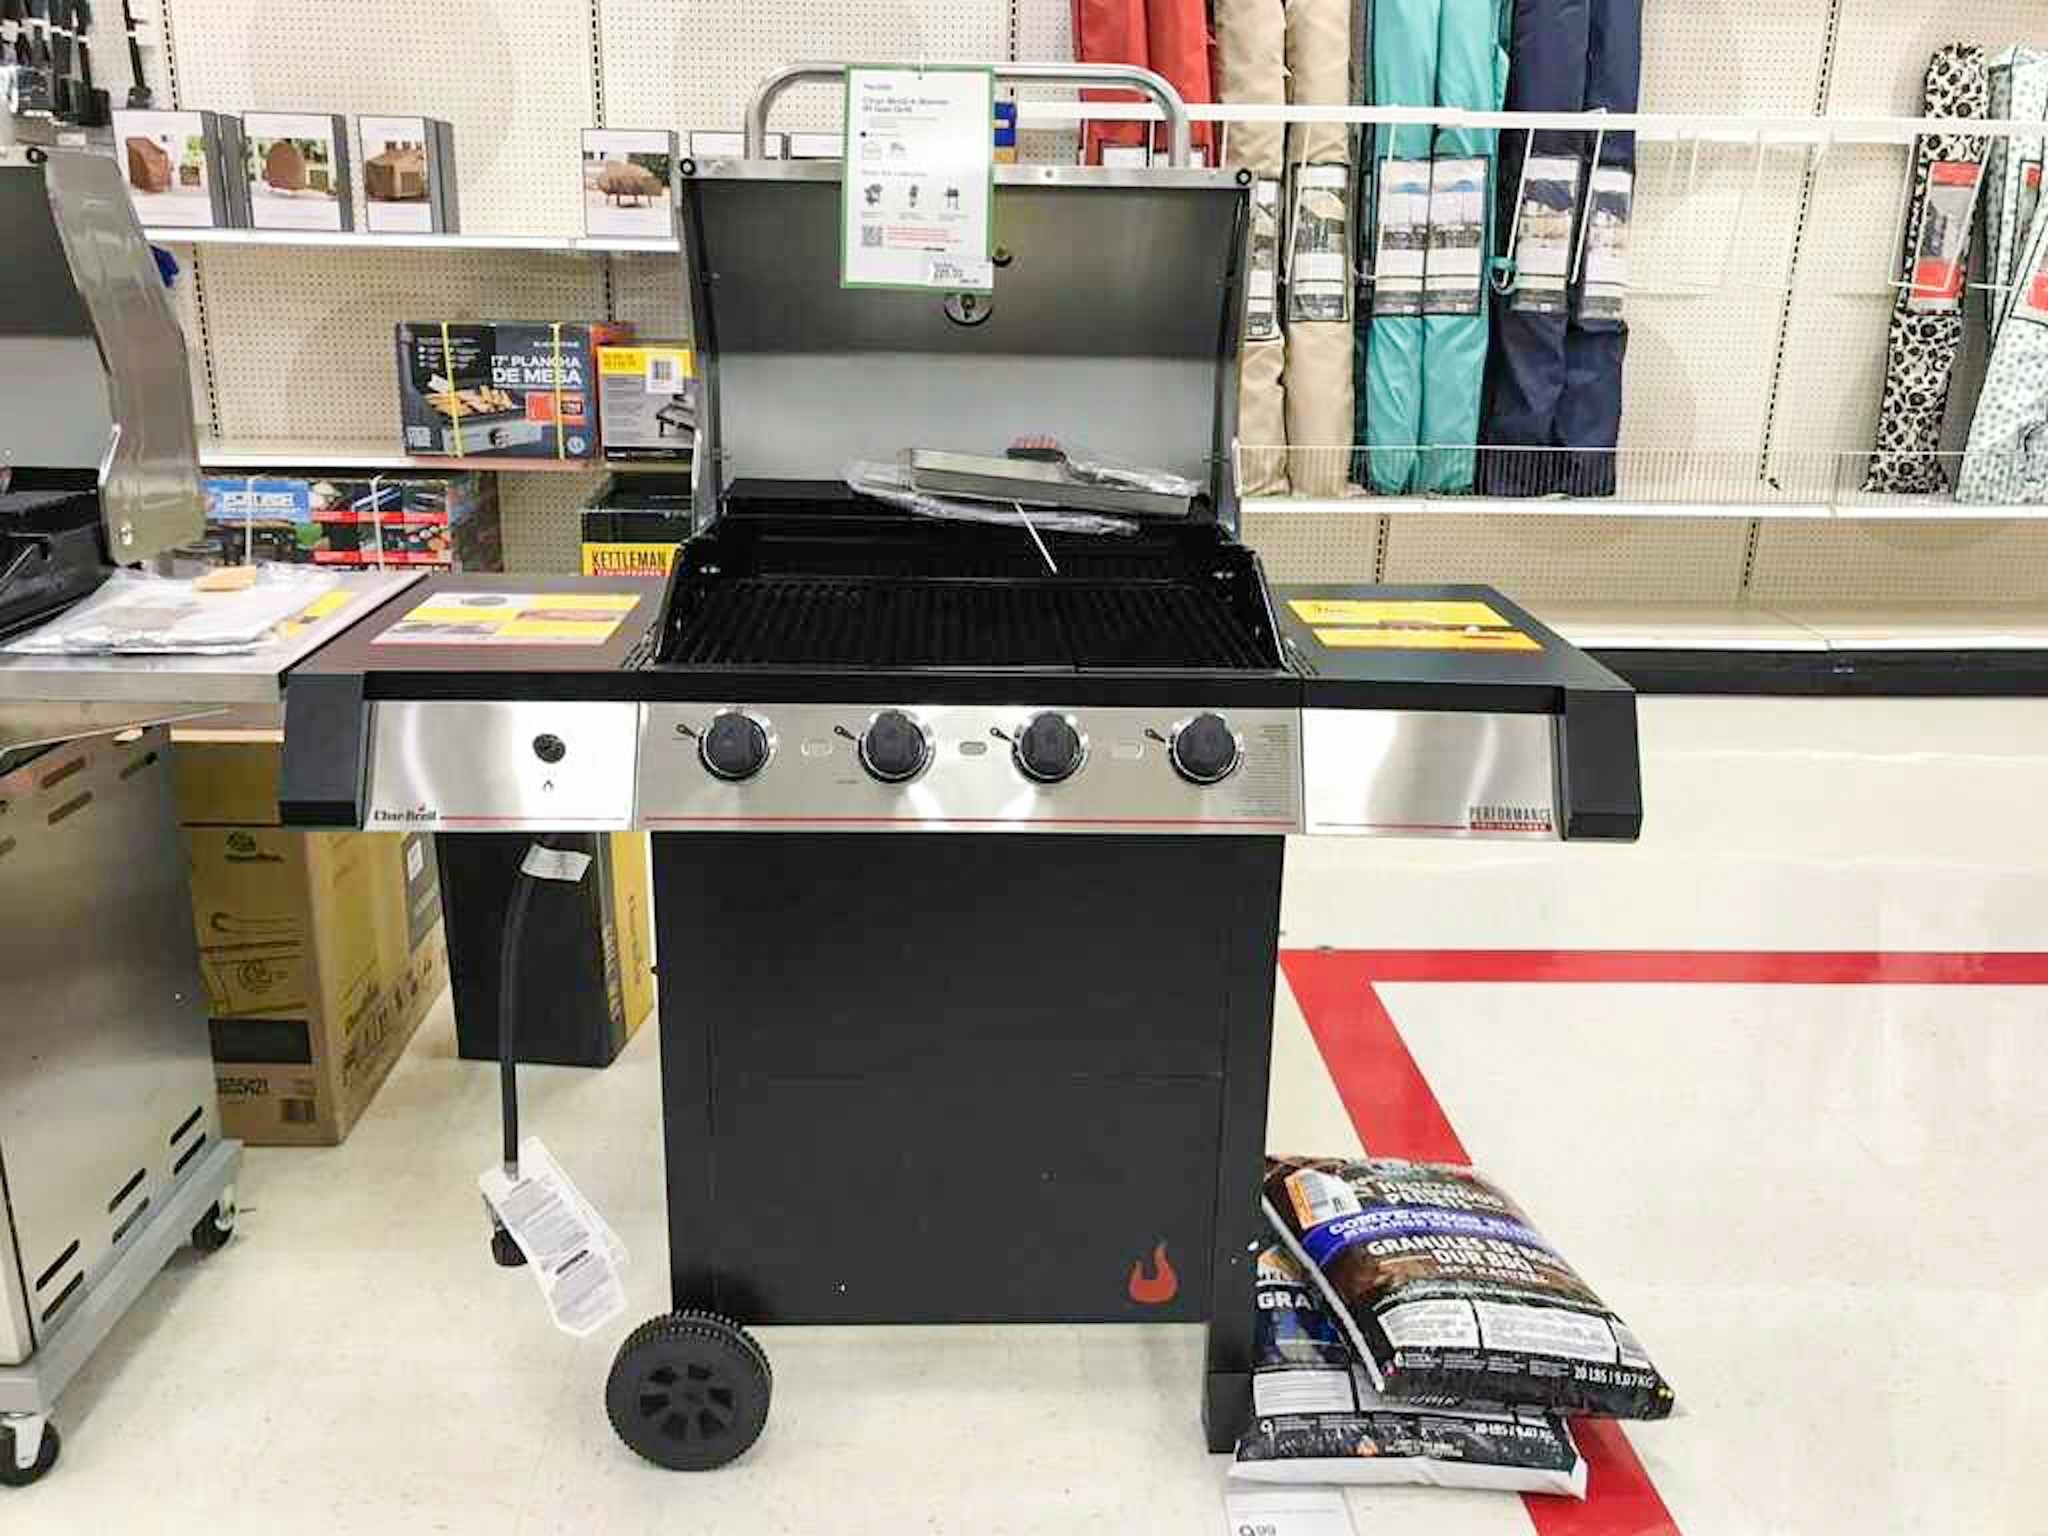 char-broil gas grill at target